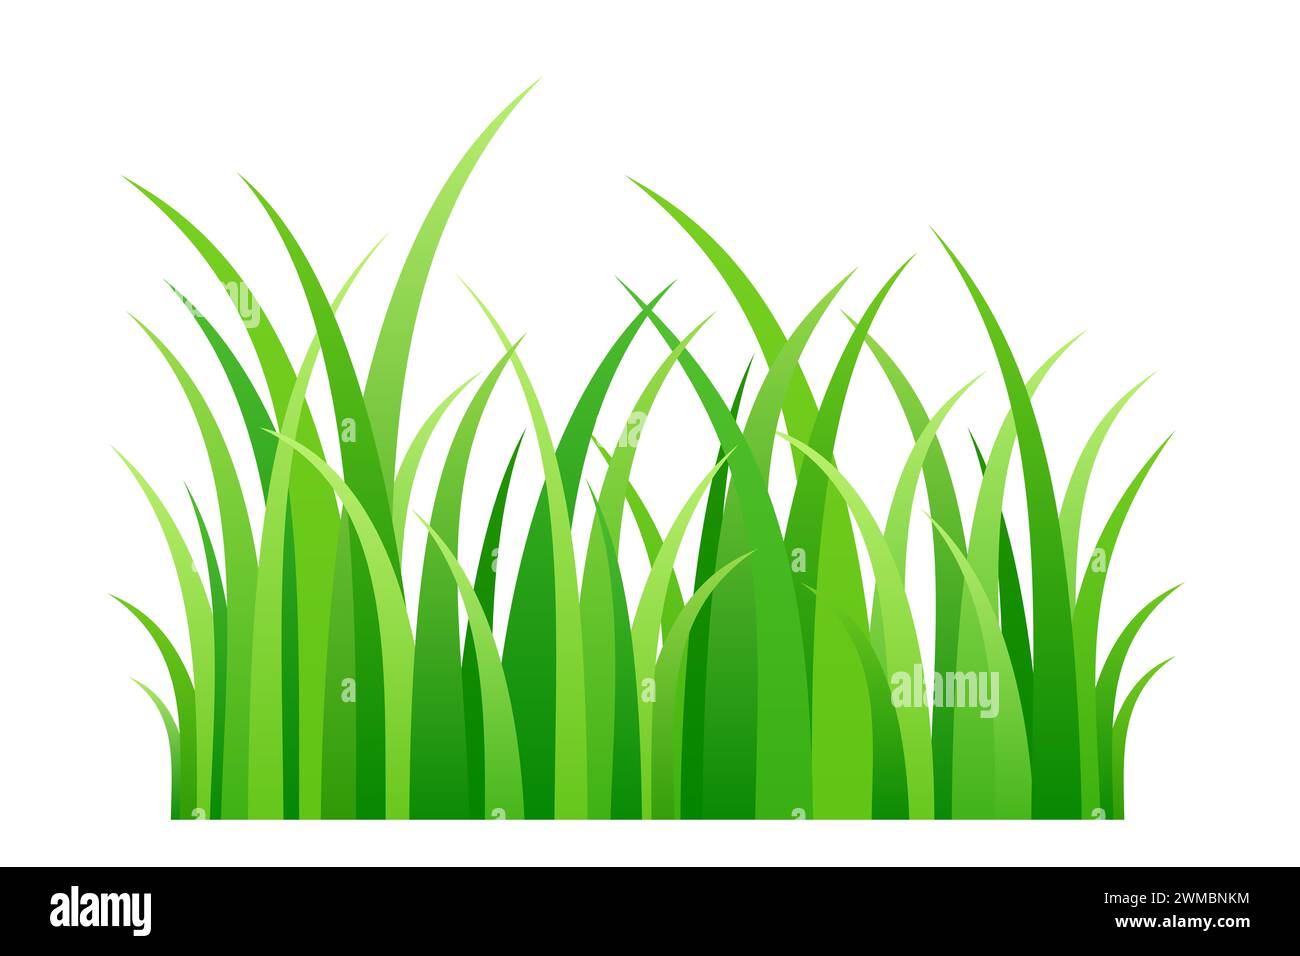 Green grass, illustration of a short strip of fresh spring grass blades. Front view of chlorophyll green stalks in a row, and a piece of lawn. Stock Photo